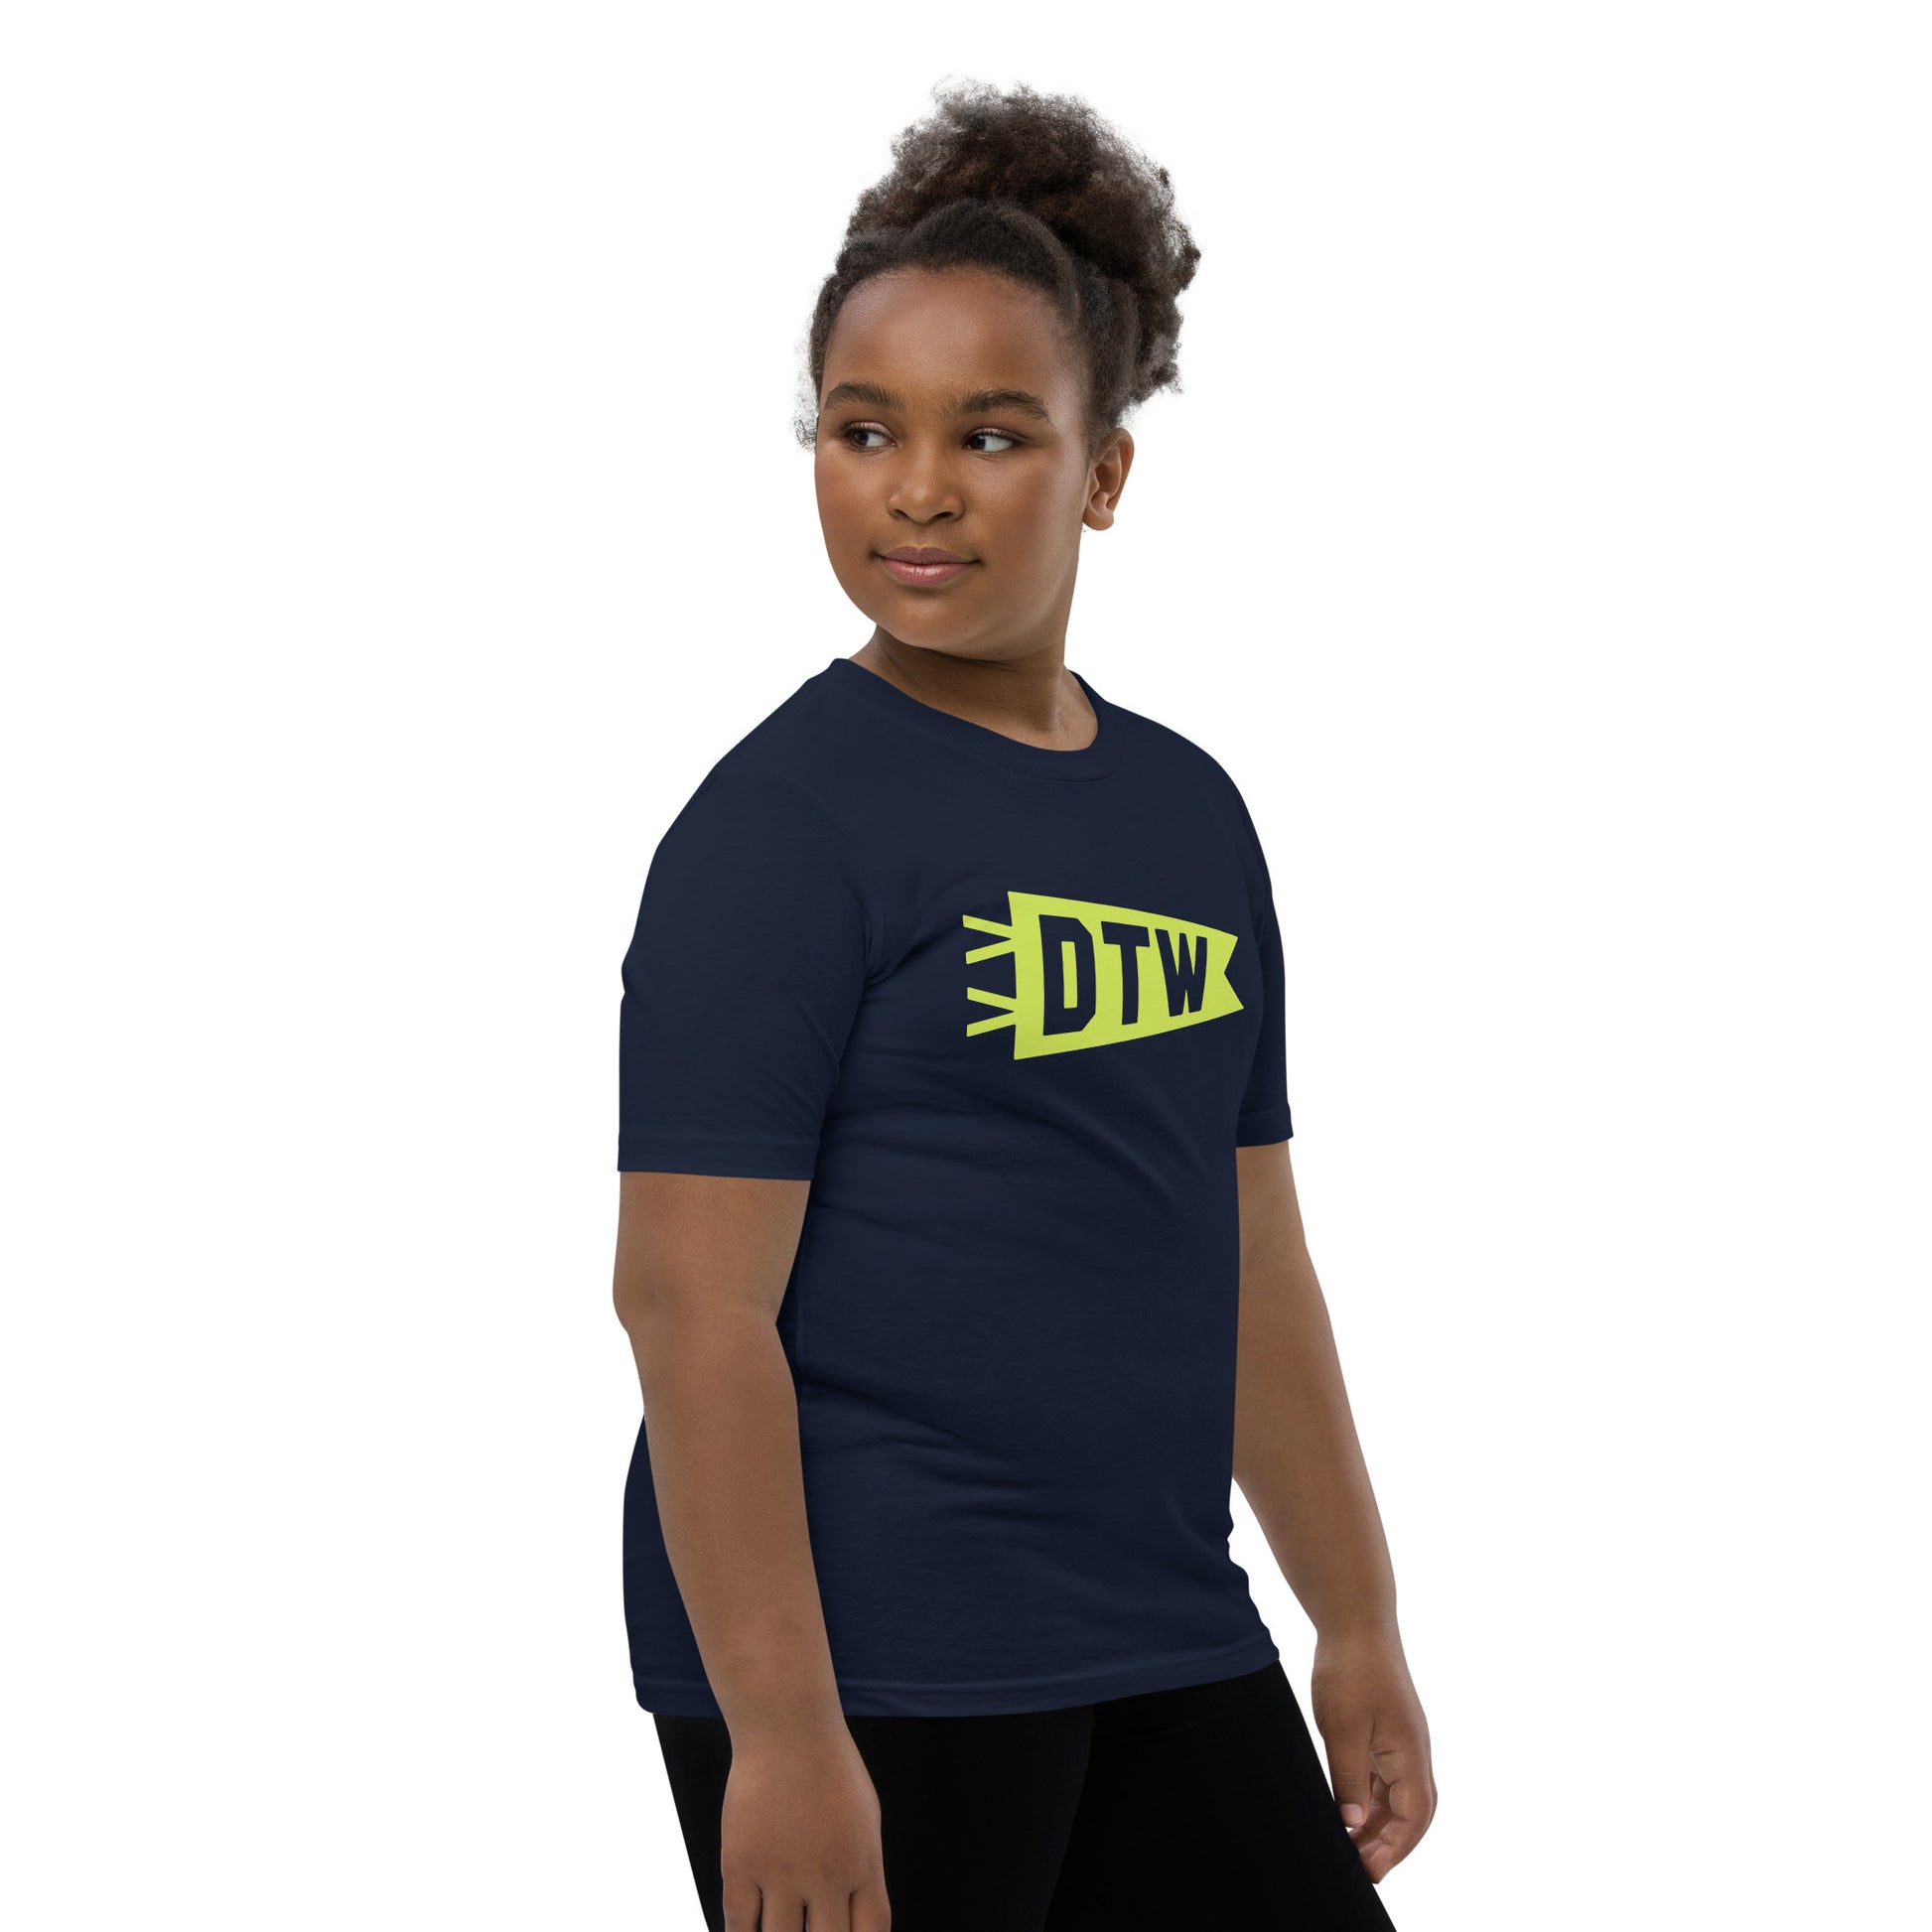 Kid's Airport Code Tee - Green Graphic • DTW Detroit • YHM Designs - Image 03